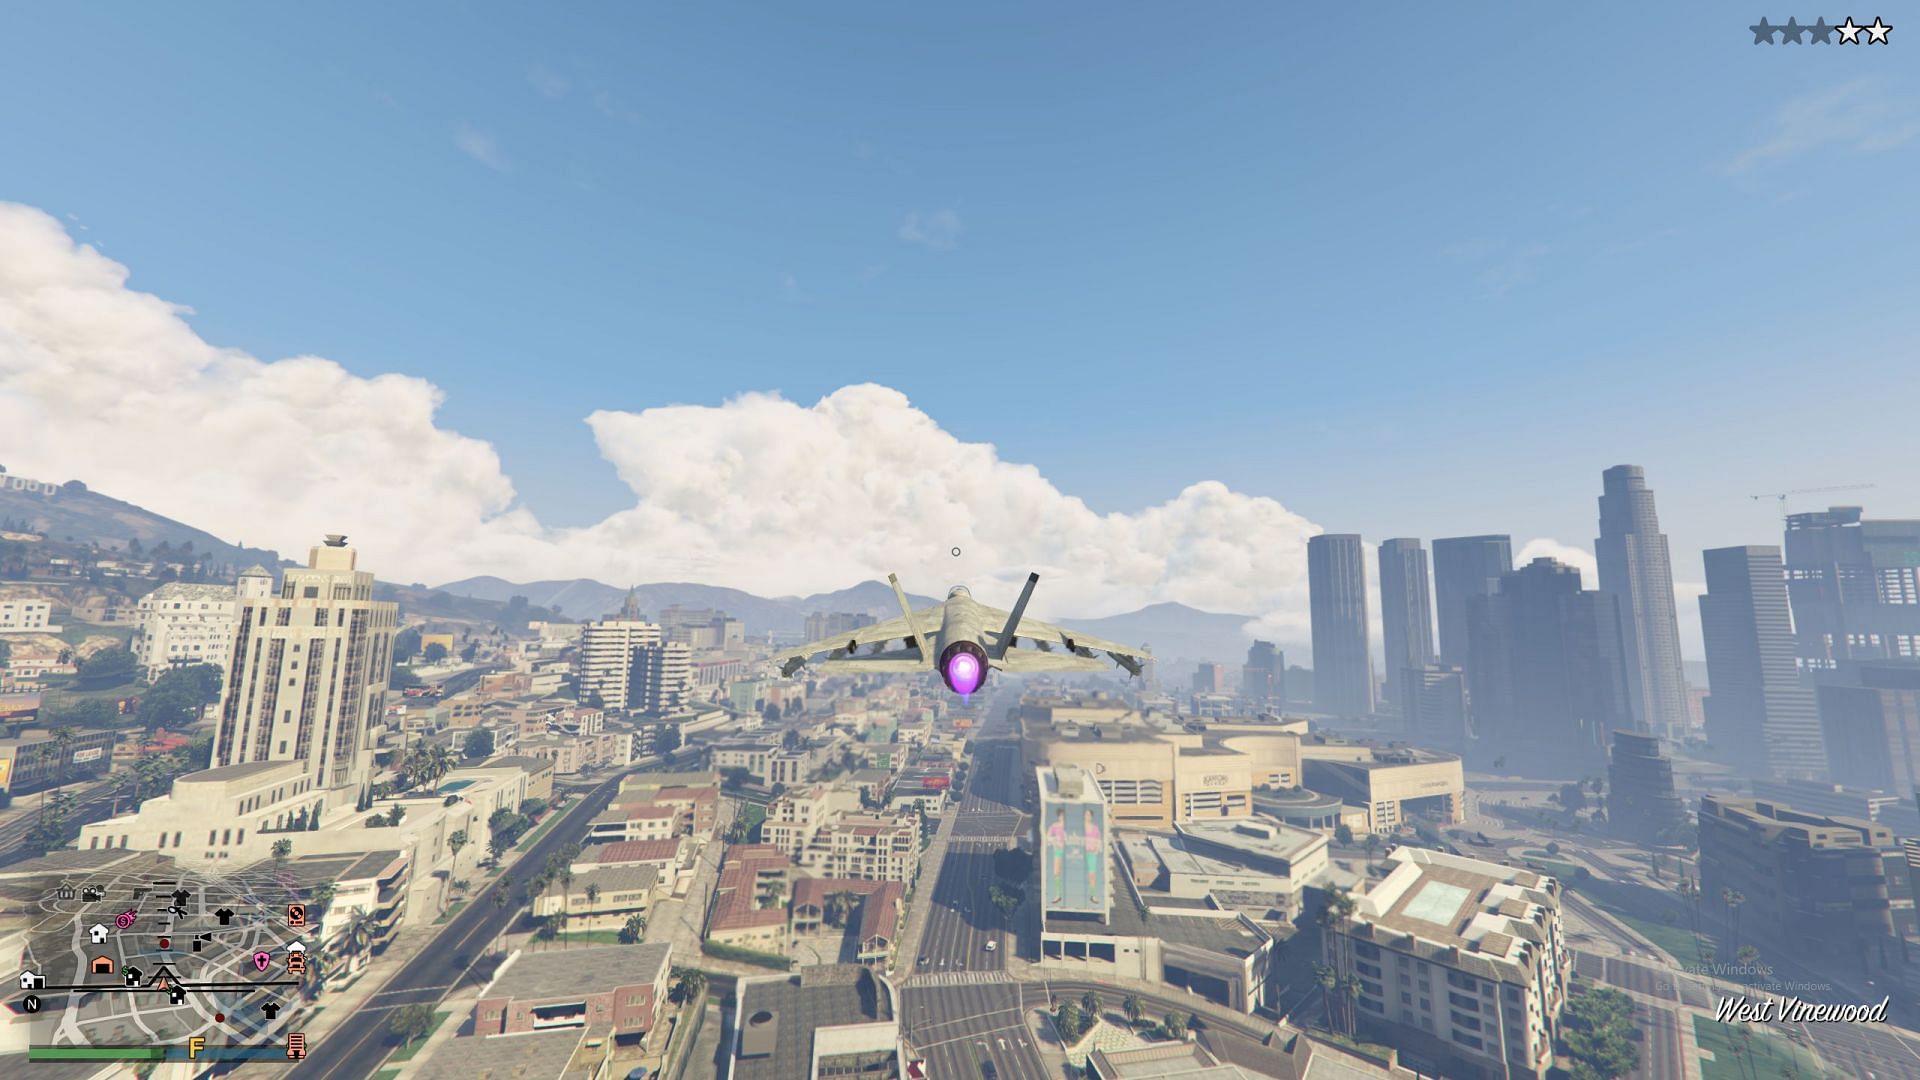 GTA Online Plus subscription gives players new benefits (Image by I_Soumajit)